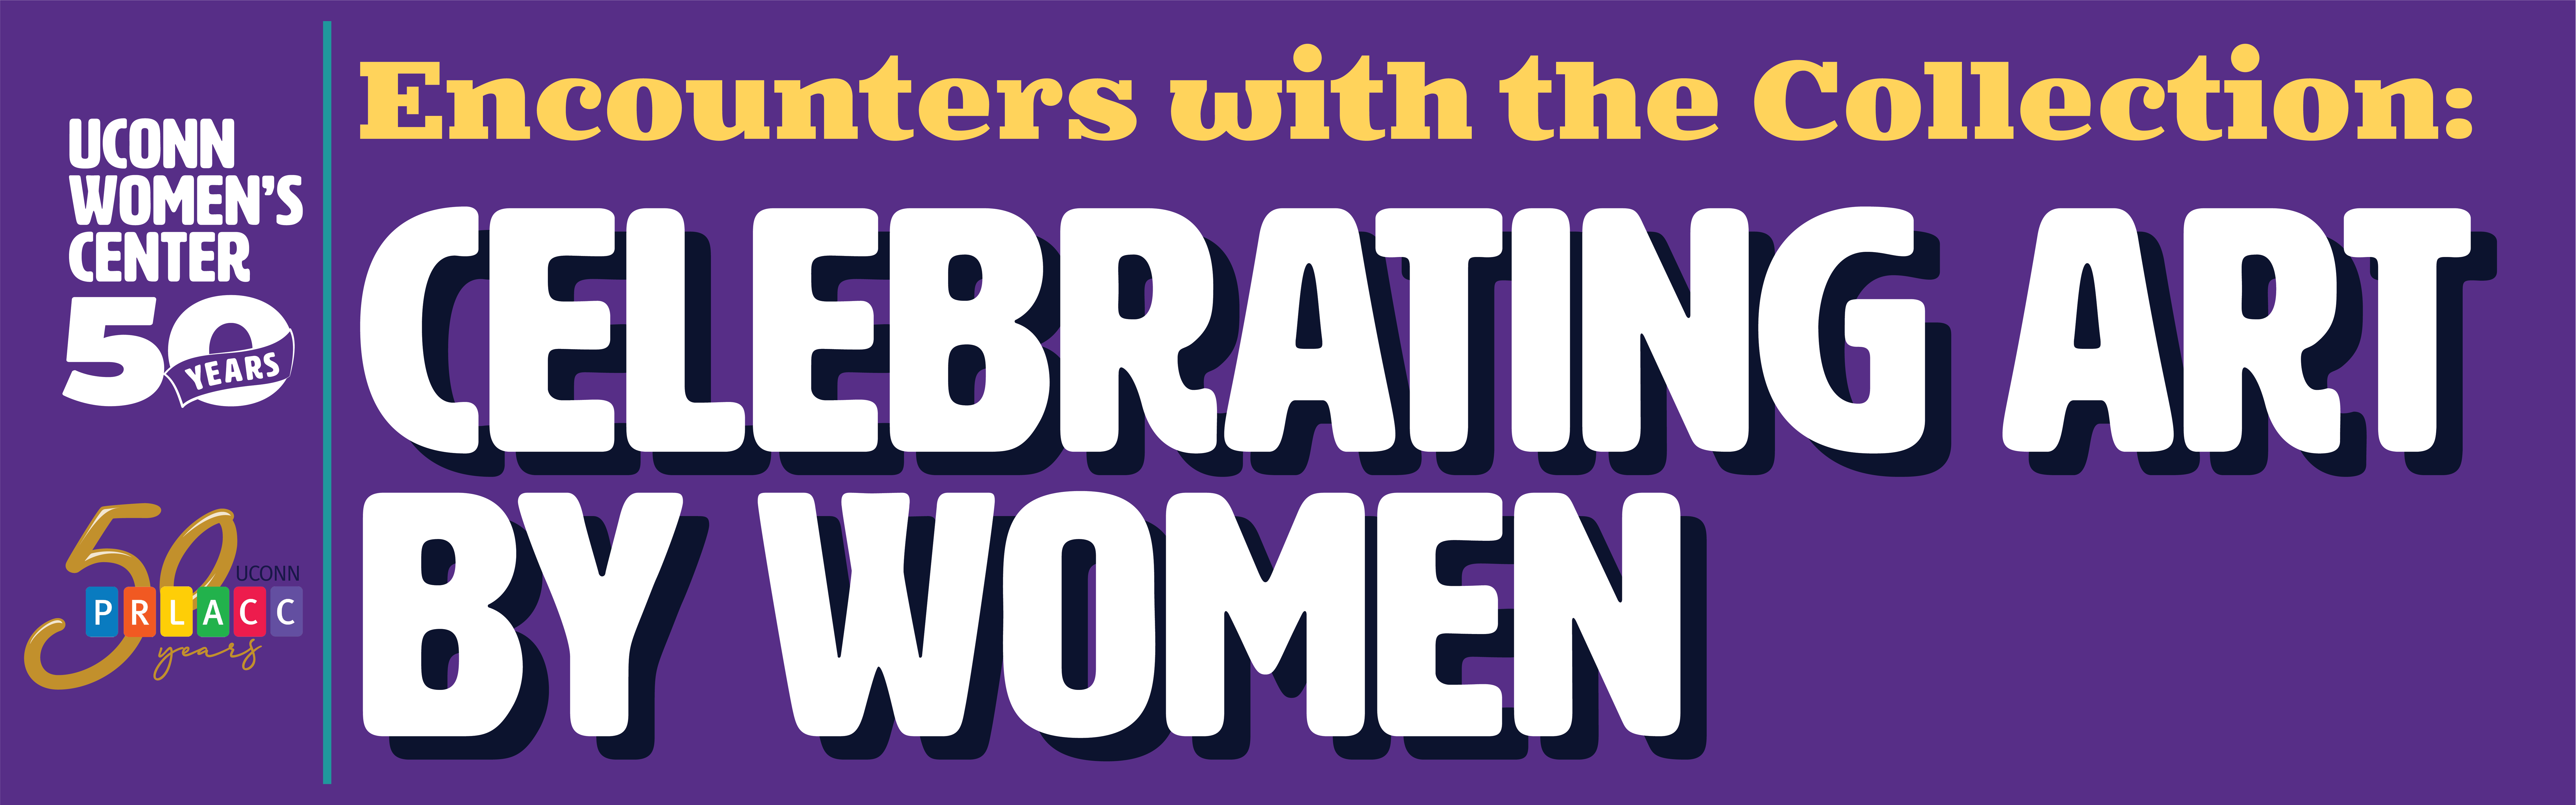 Banner for Enounters with the Collection: Celebrating Art by Women